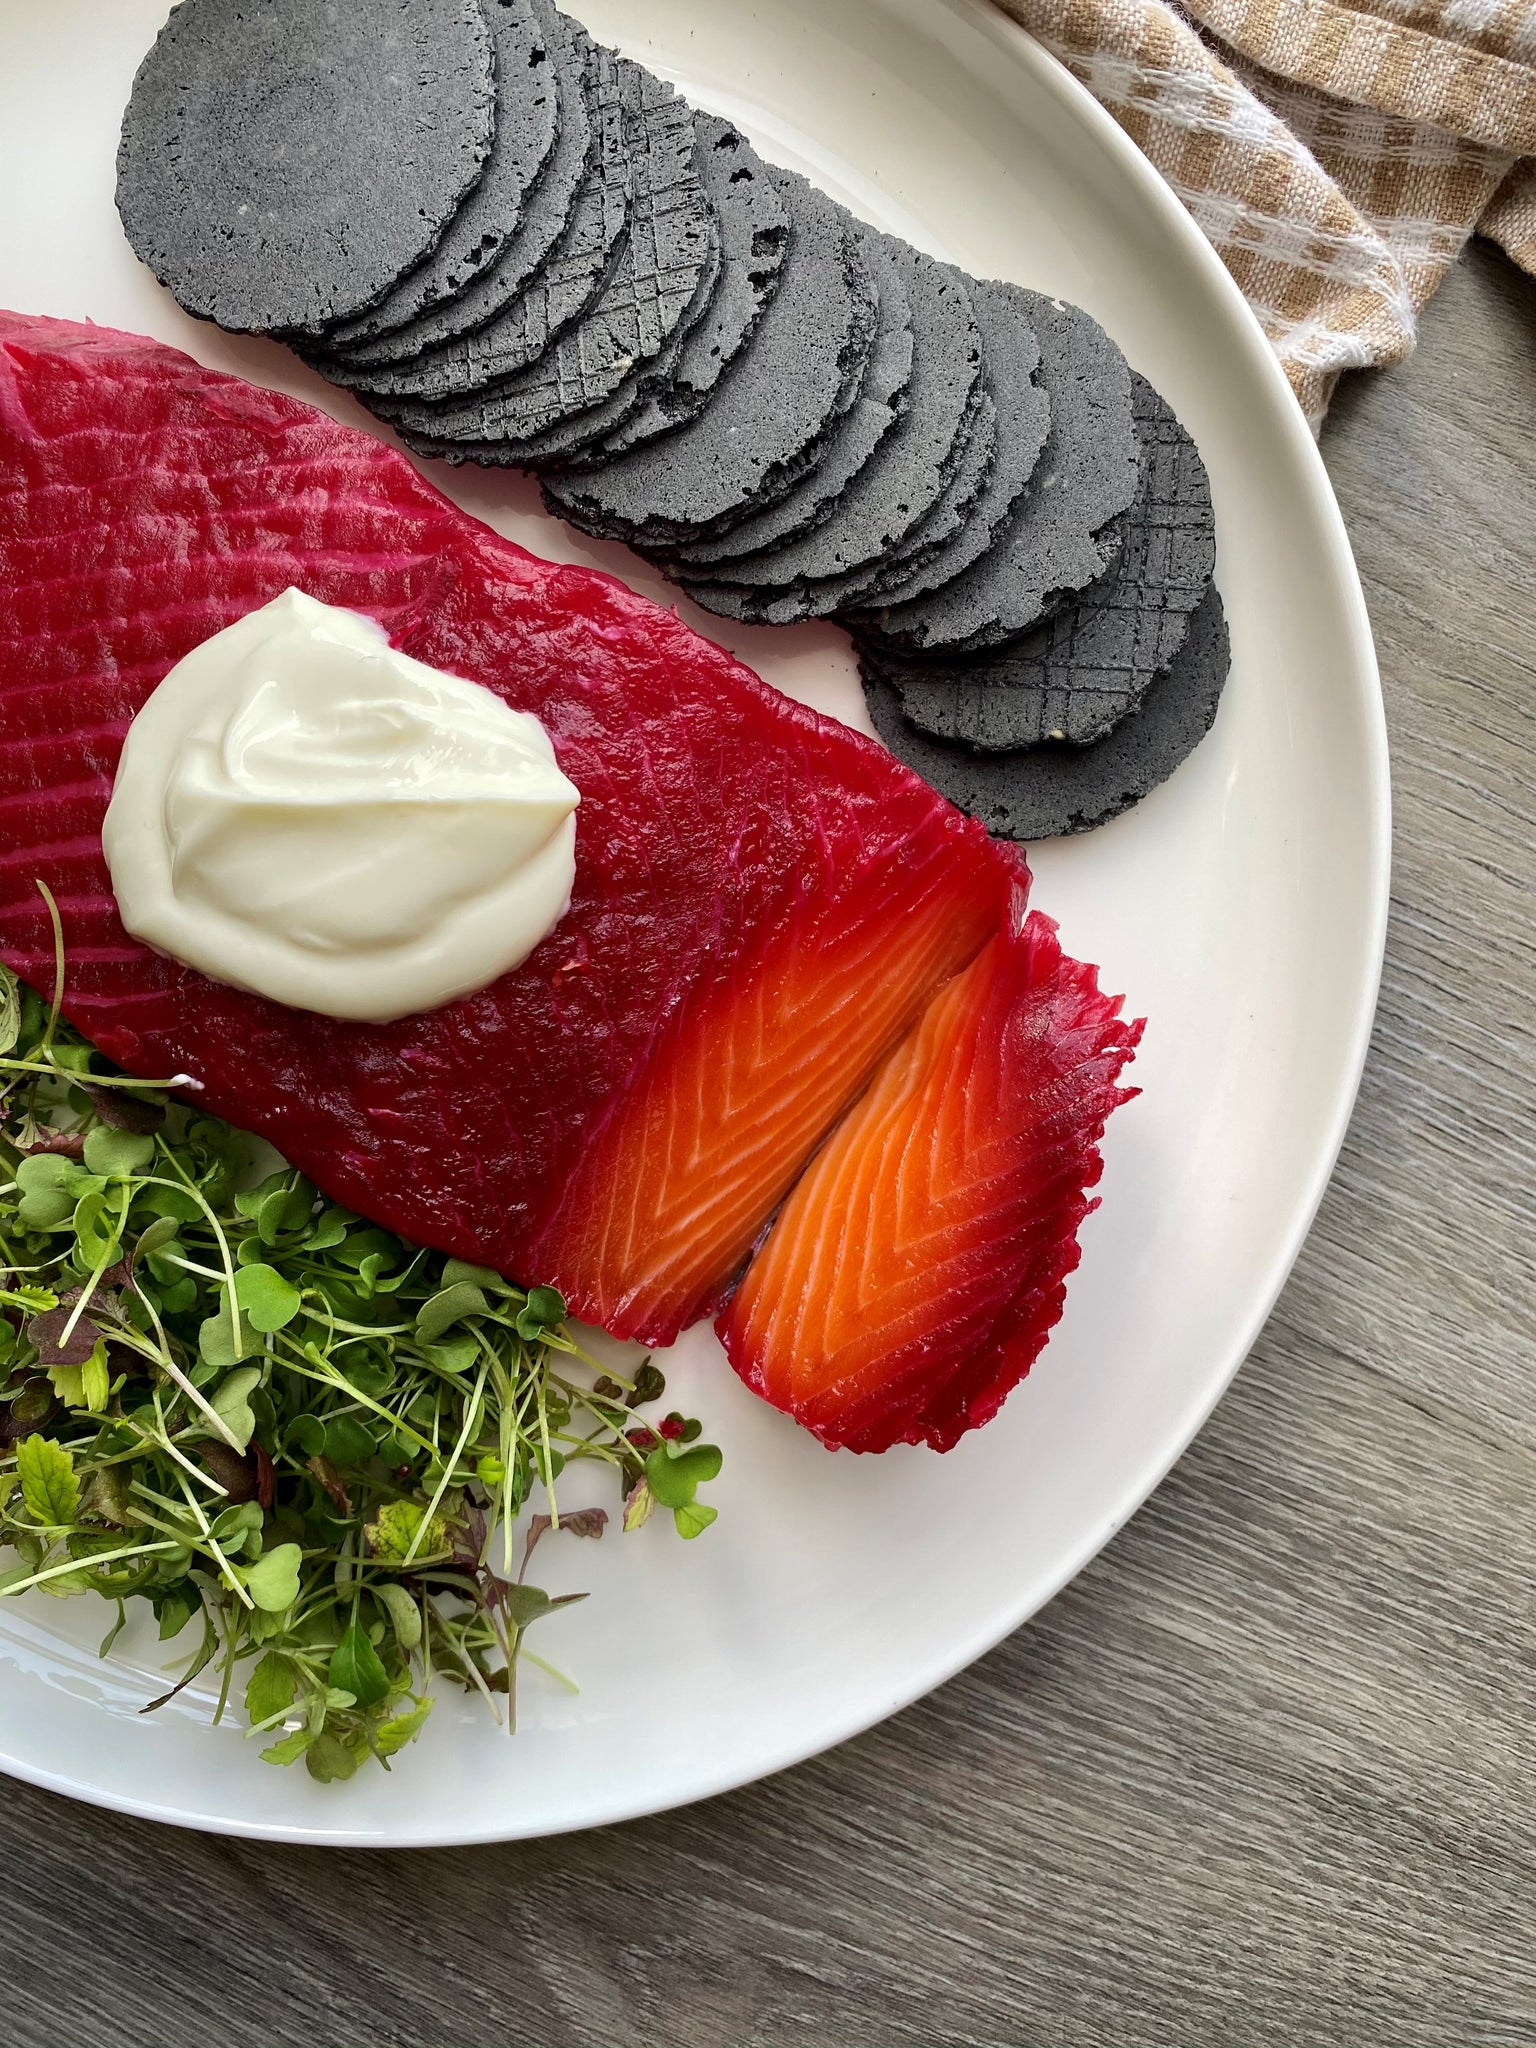 Beetroot cured salmon on a plate with charcoal crackers and microgreens